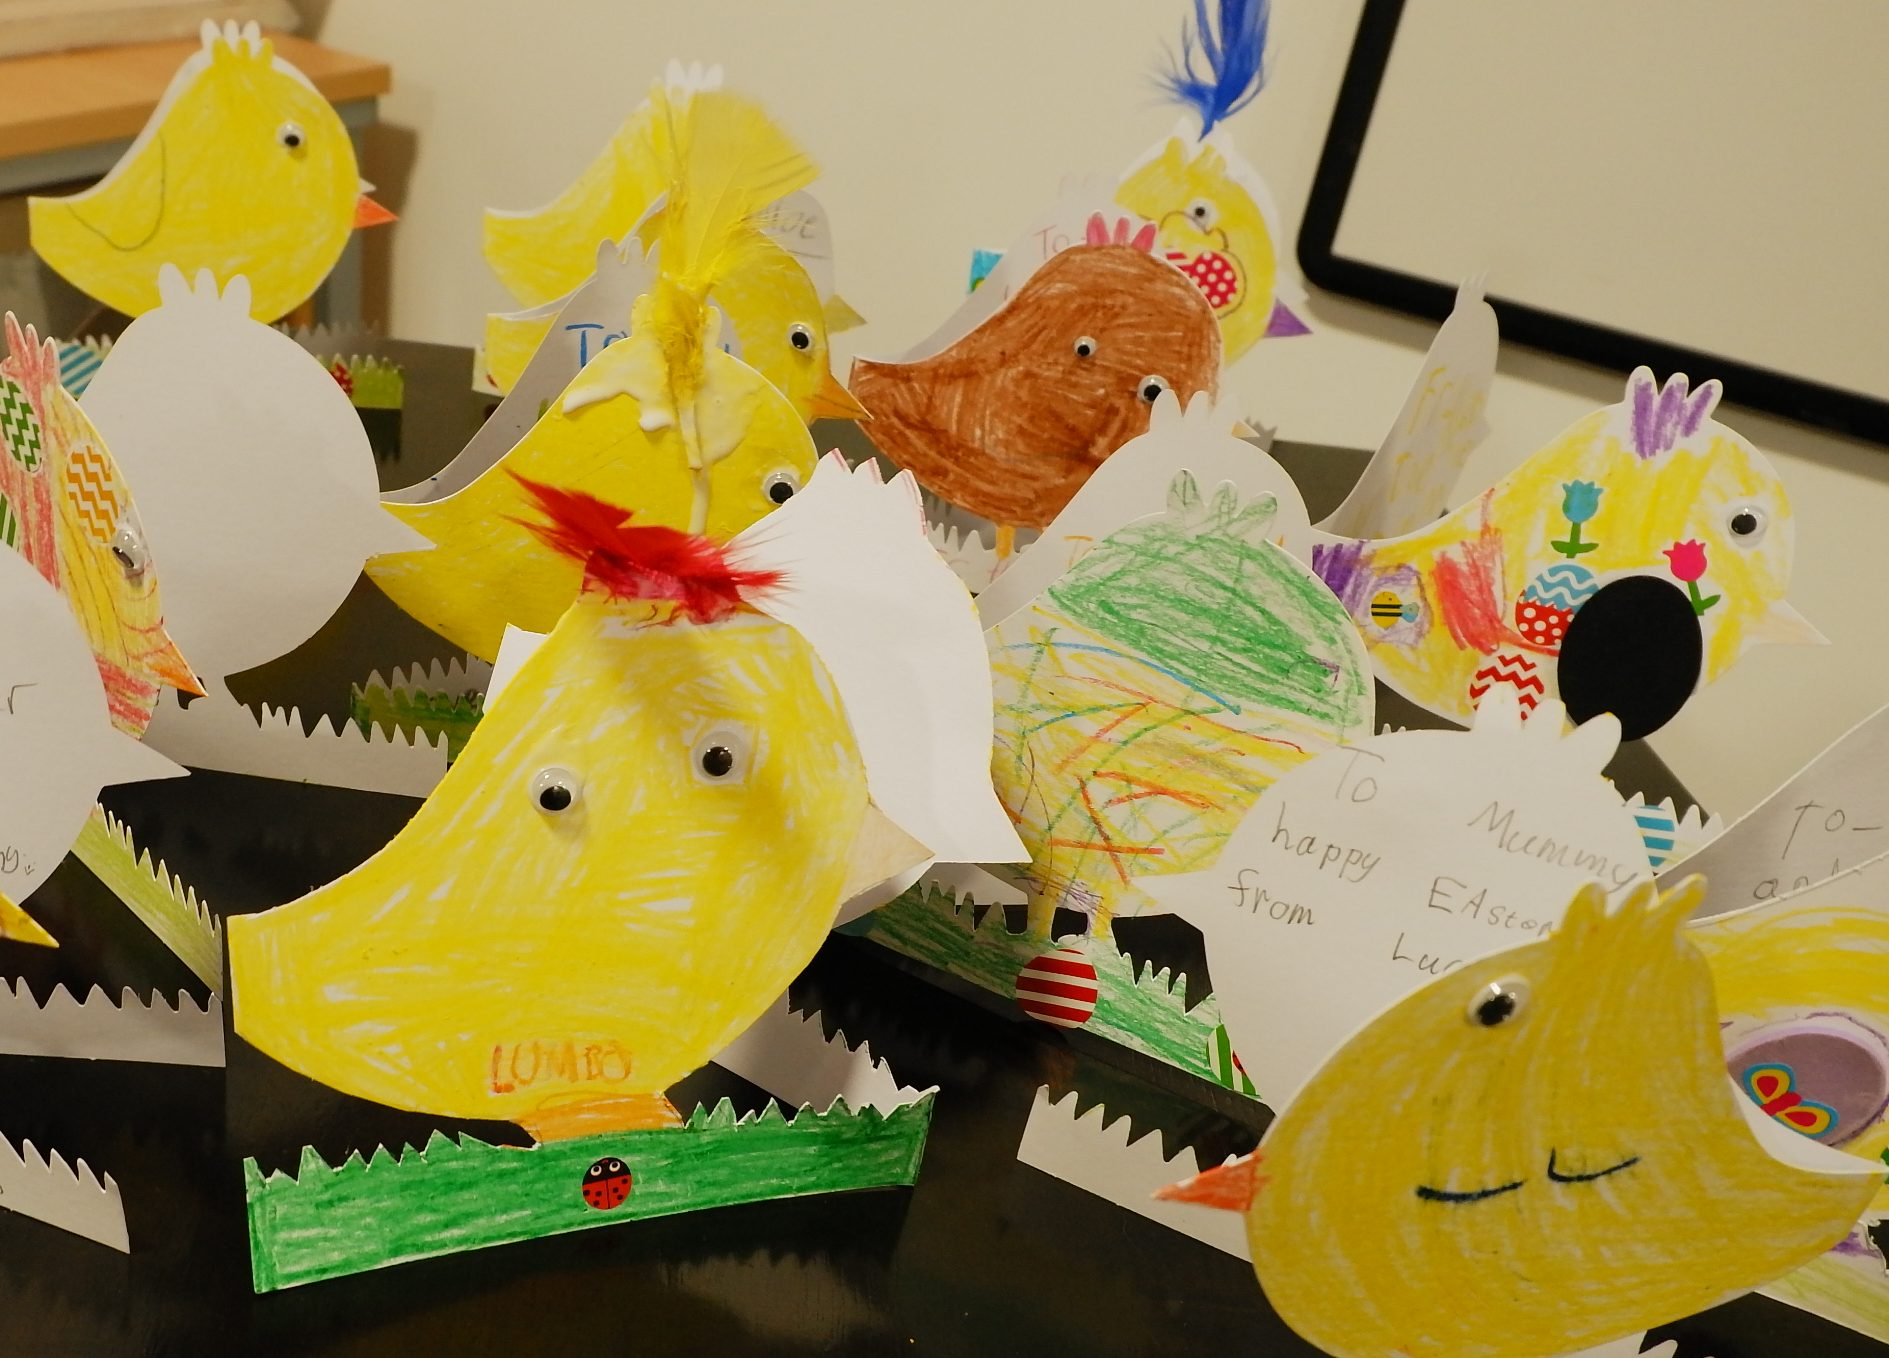 Some of the Easter chicks created by young people!